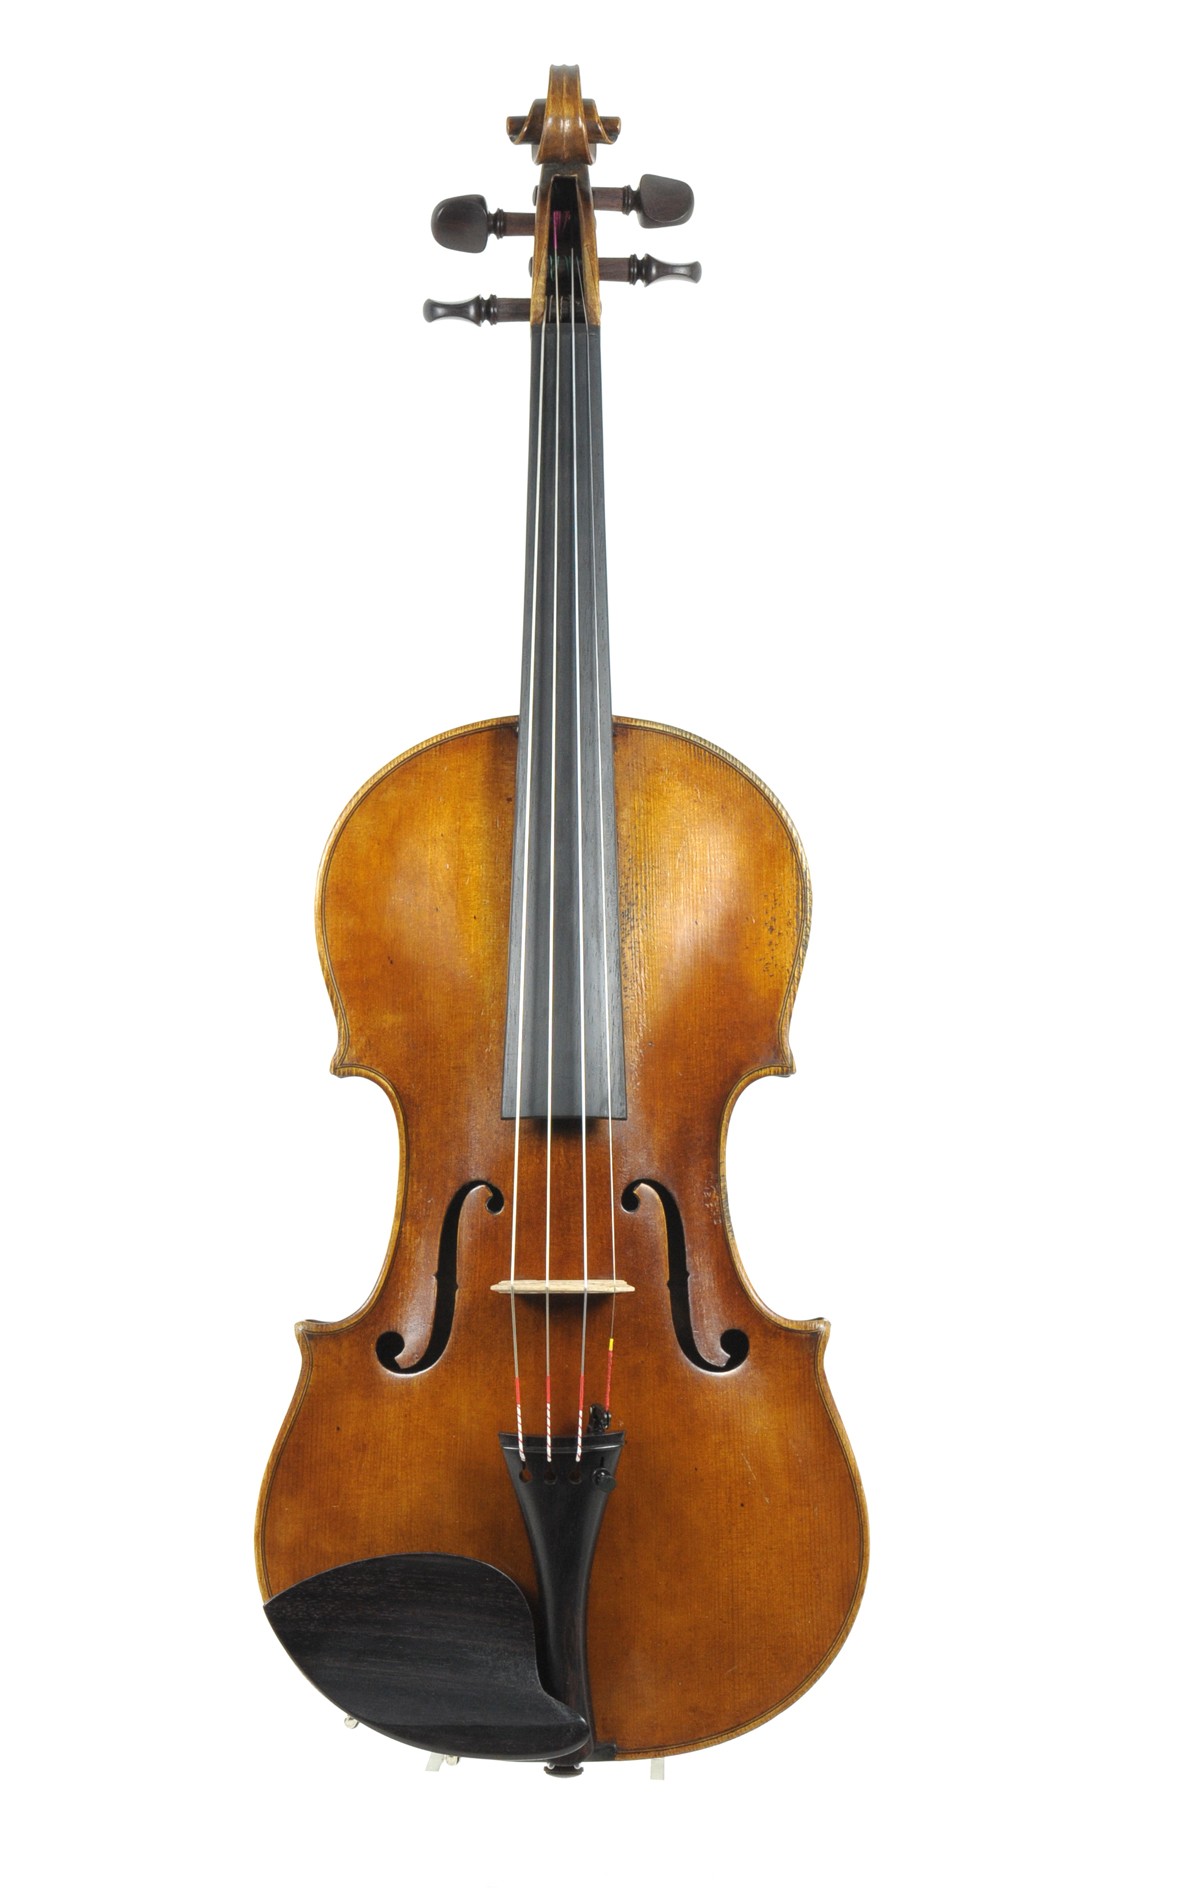 French violin after Louis Gersan - top 